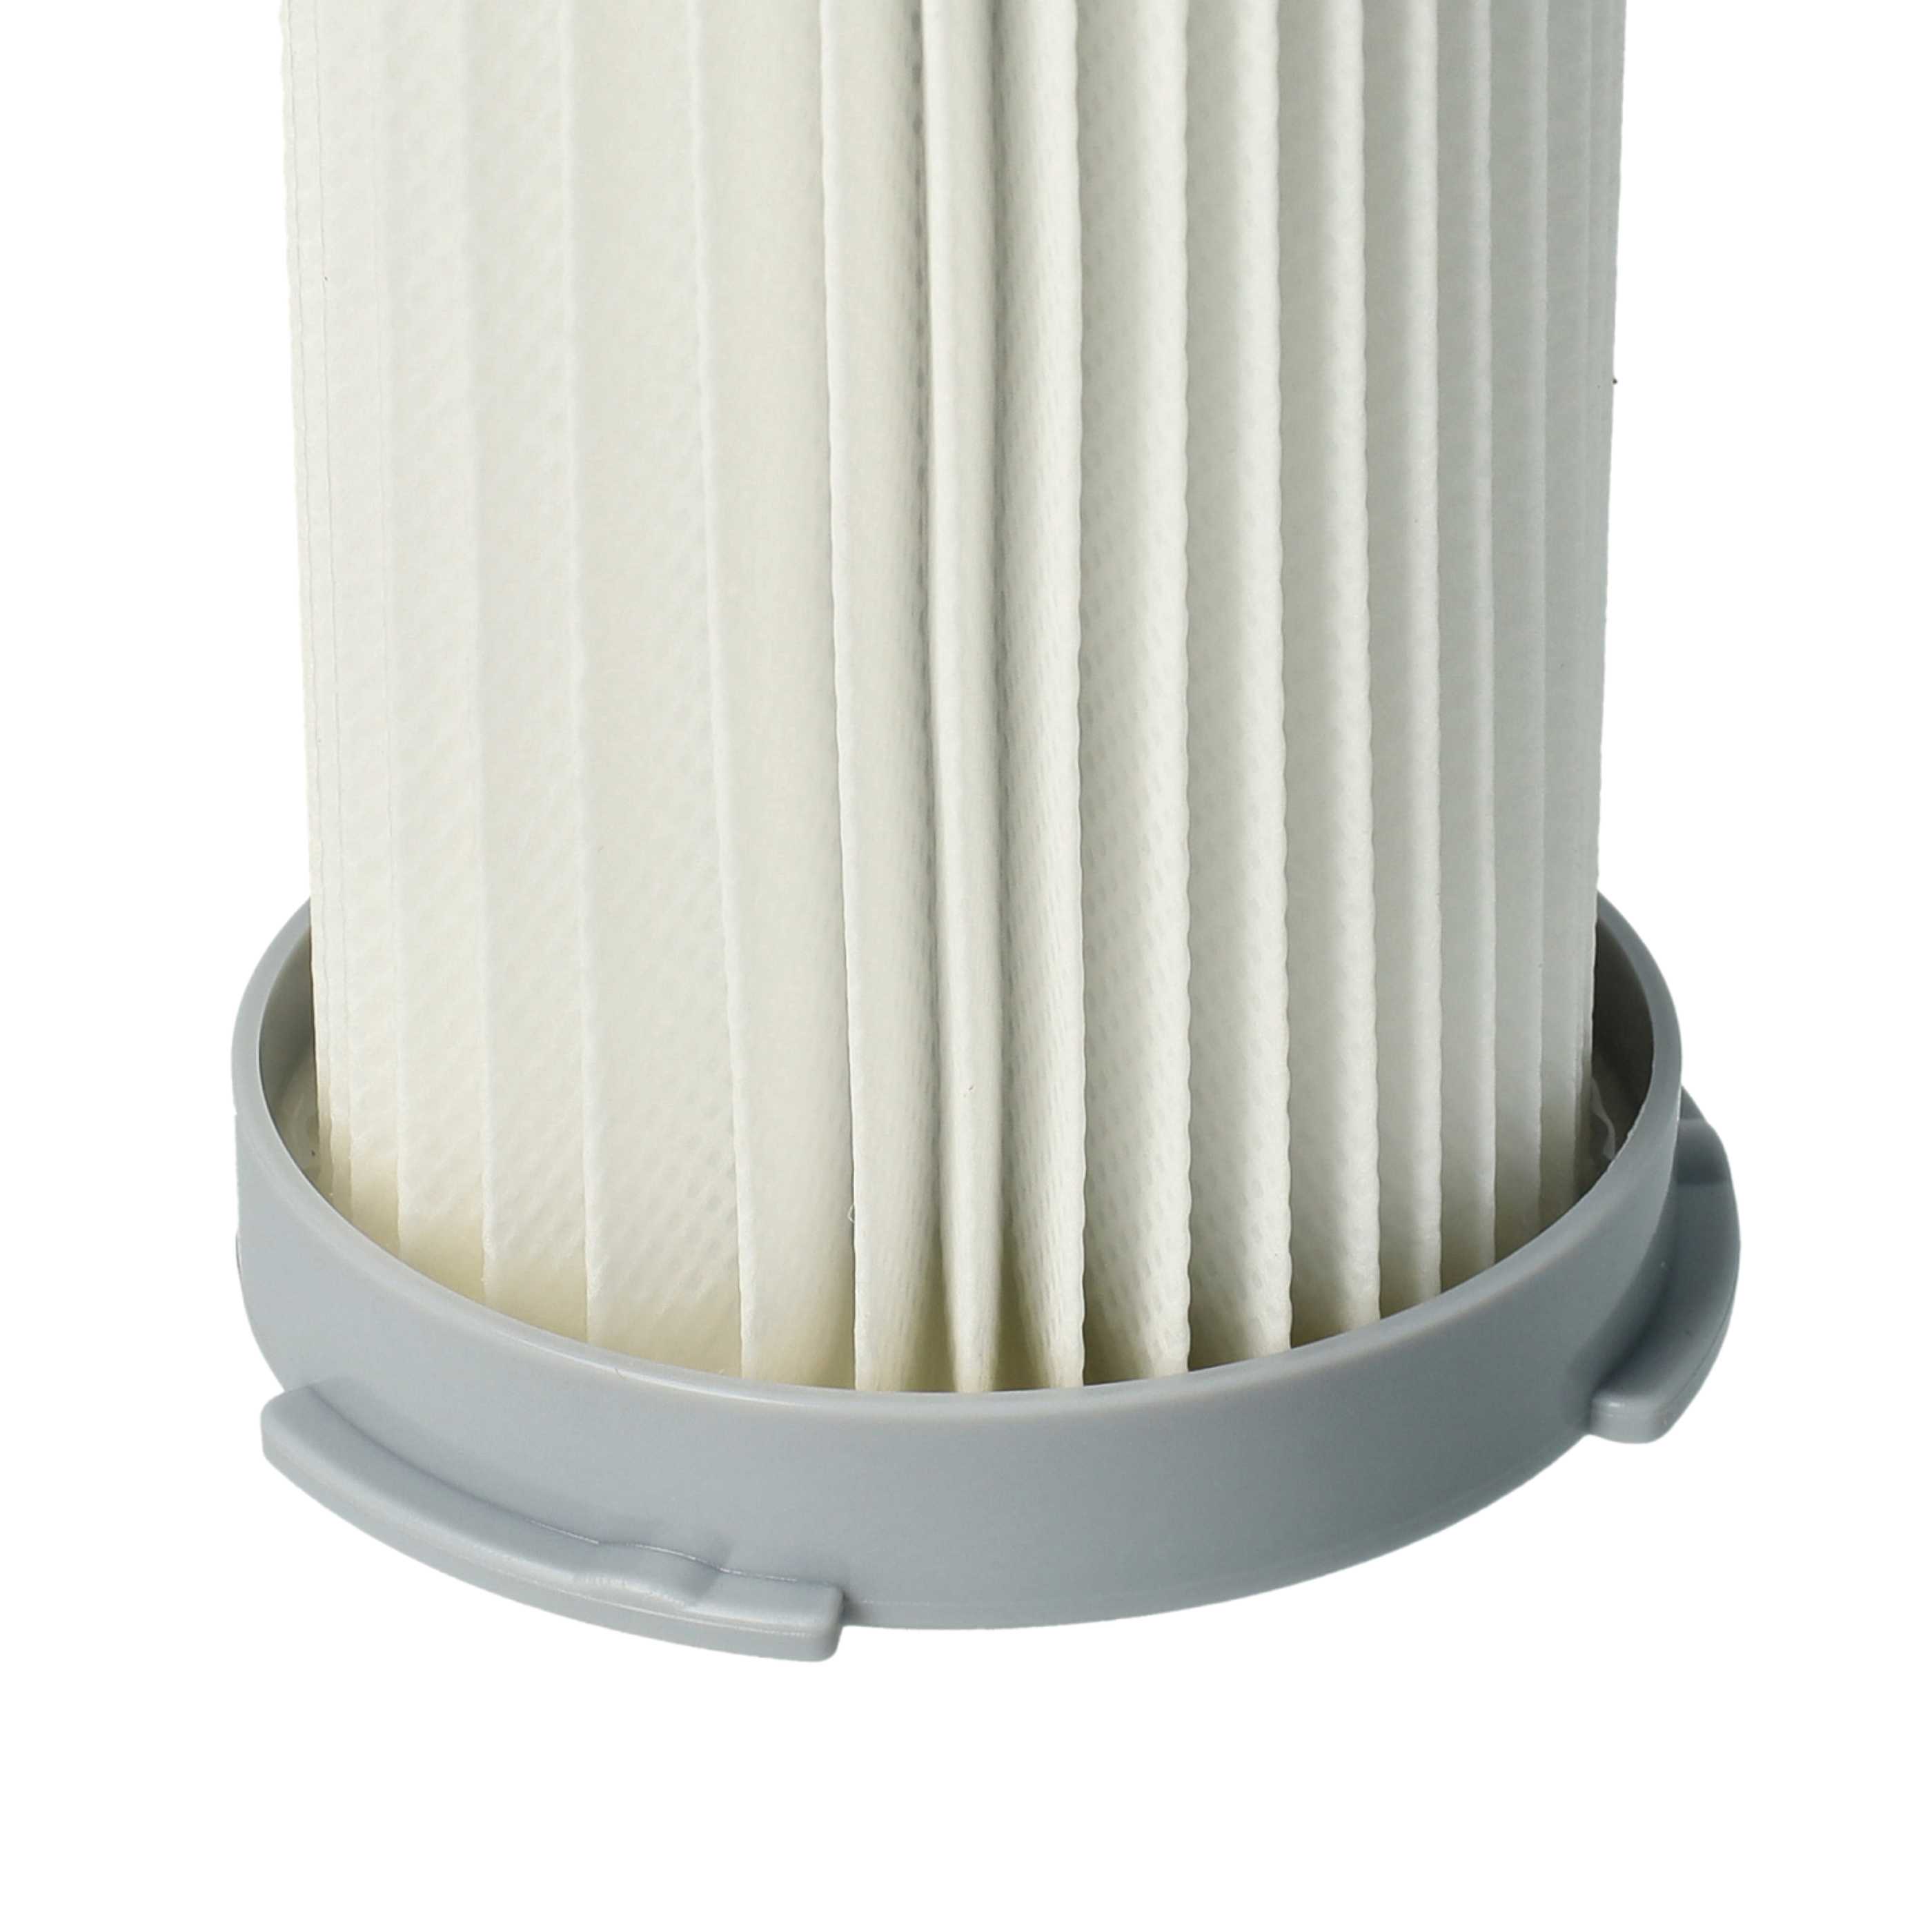 3x exhaust filter replaces Electrolux EF75B for AEG/ElectroluxVacuum Cleaner